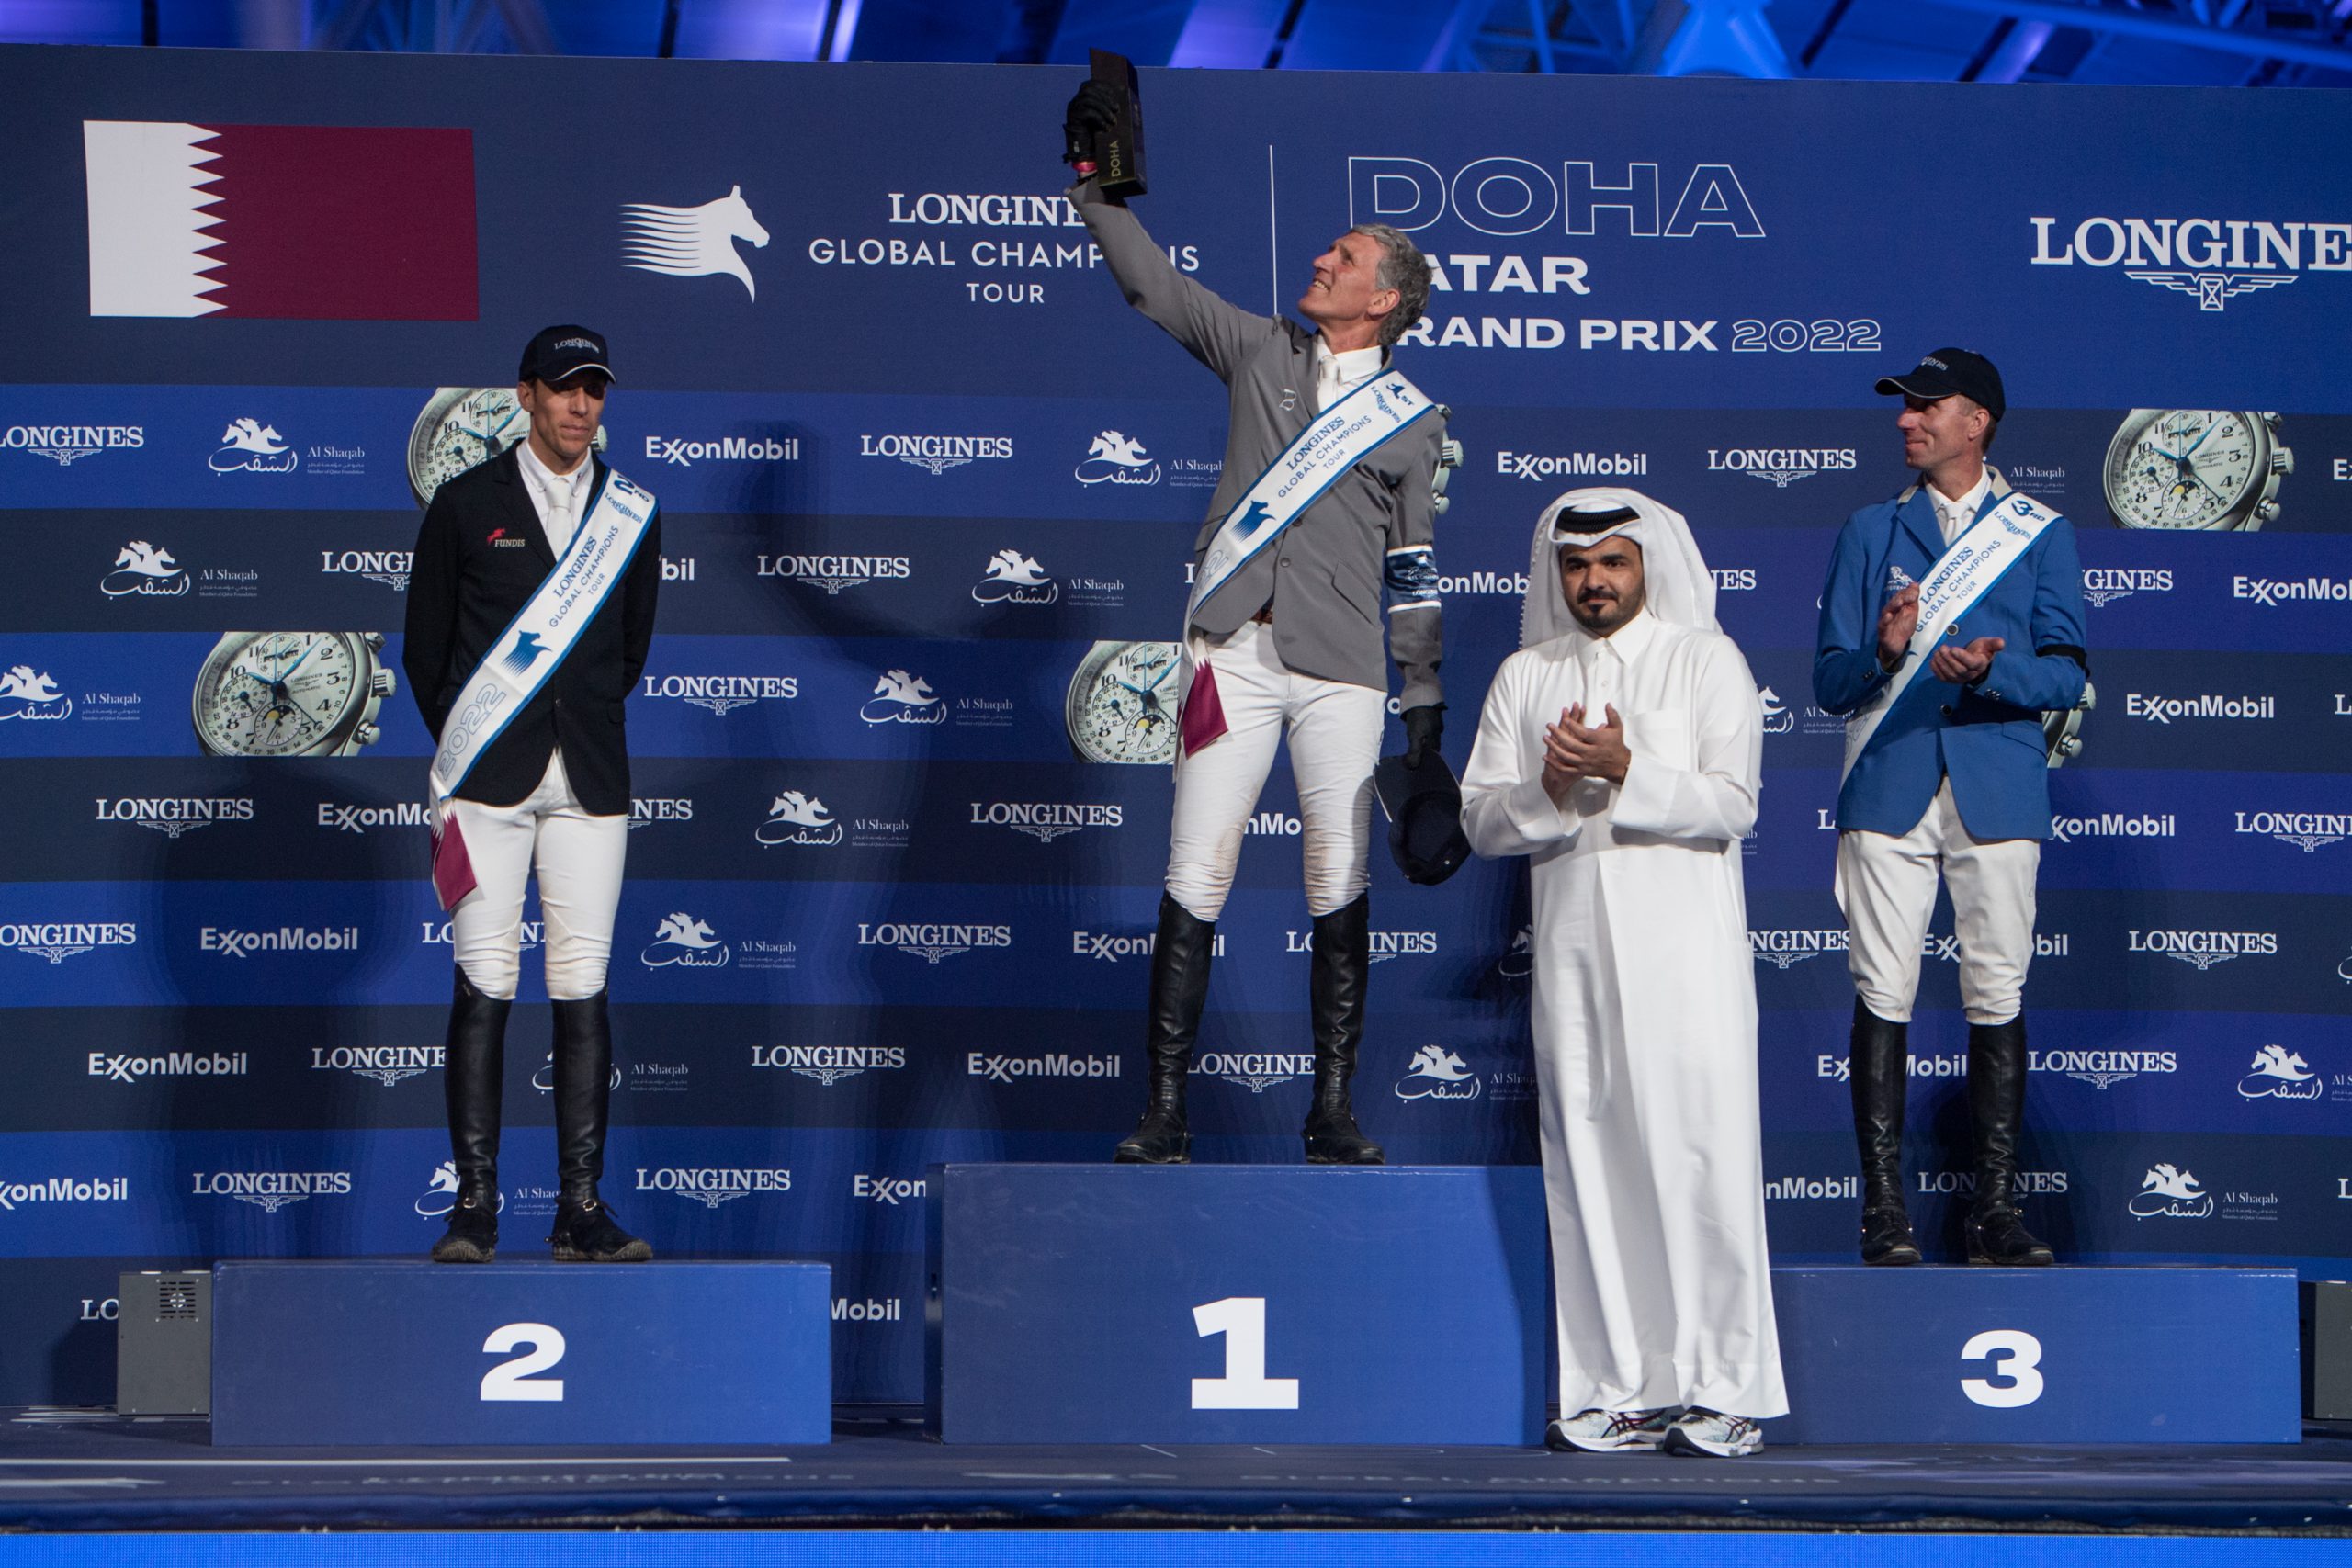 Sheikh Joaan Crowns Winners of Longines Global Champions Tour